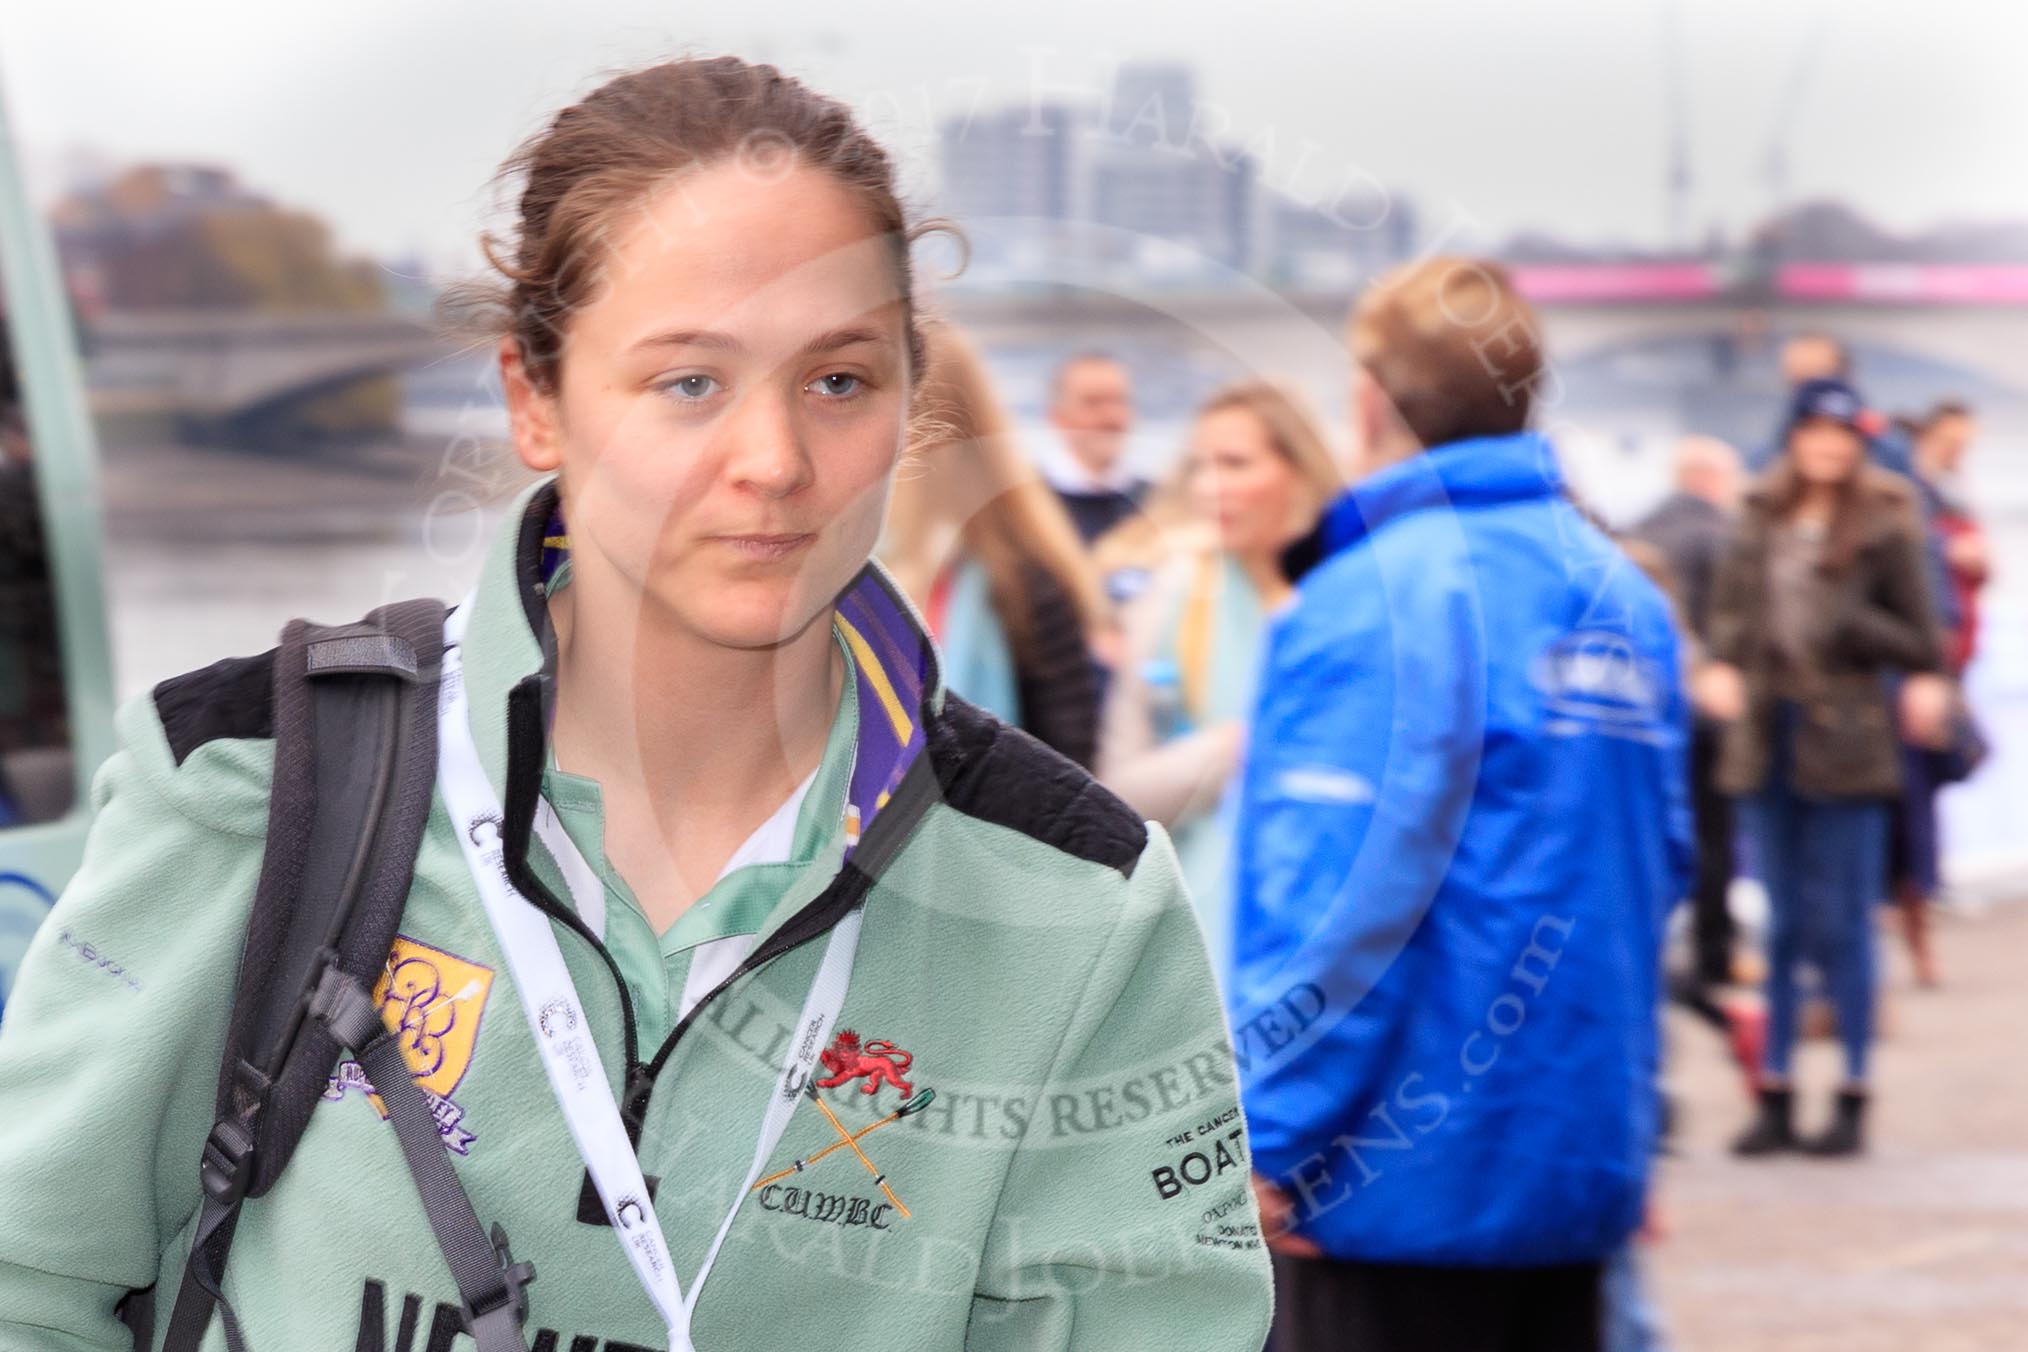 The Cancer Research UK Women's Boat Race 2018: Cambridge bow seat Tricia Smith arriving at the boathouses before the race.
River Thames between Putney Bridge and Mortlake,
London SW15,

United Kingdom,
on 24 March 2018 at 13:54, image #13